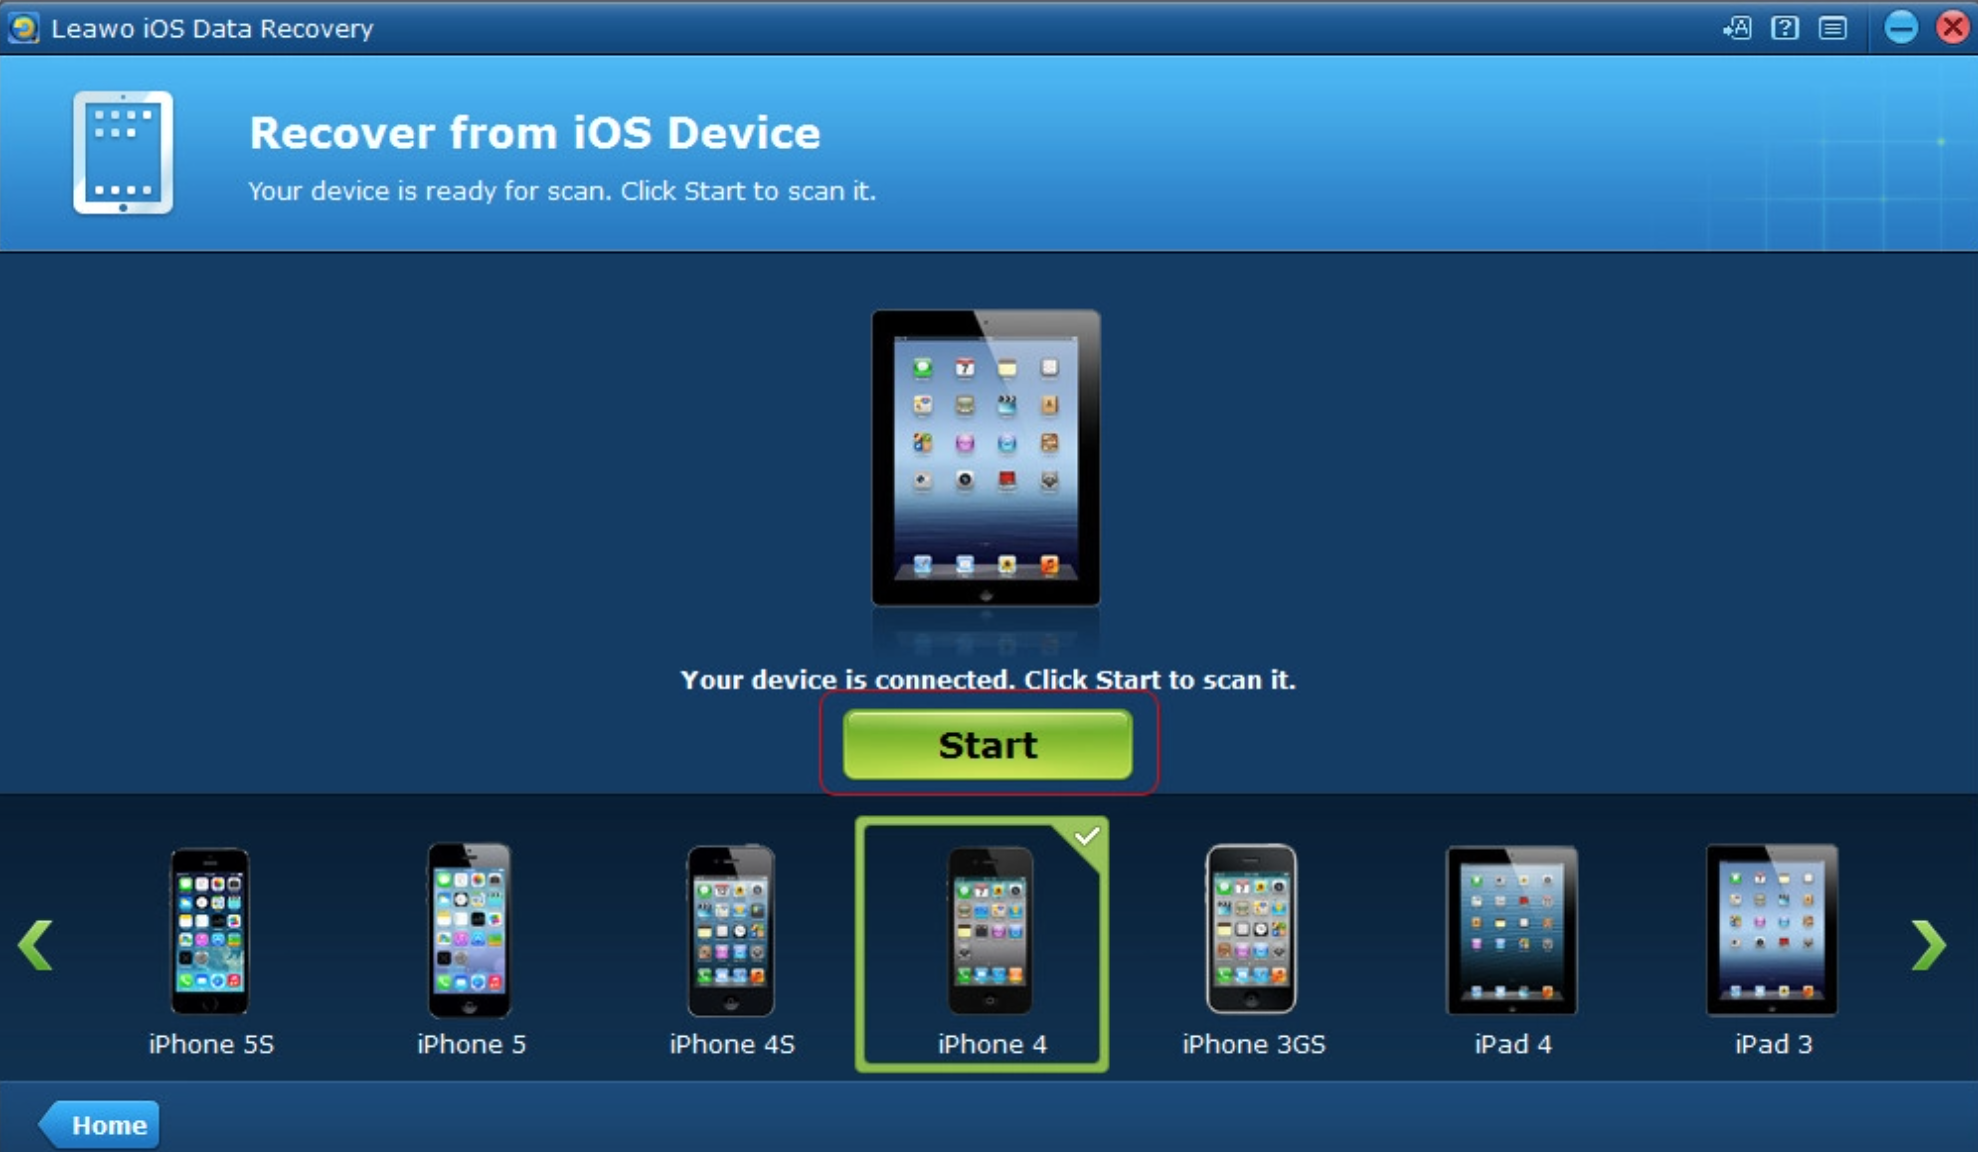 Mobile device support. Recover data for IPAD. Recovery IOS зеленыярлы. Move iphone to start Scanner. Design von IOS 2007.